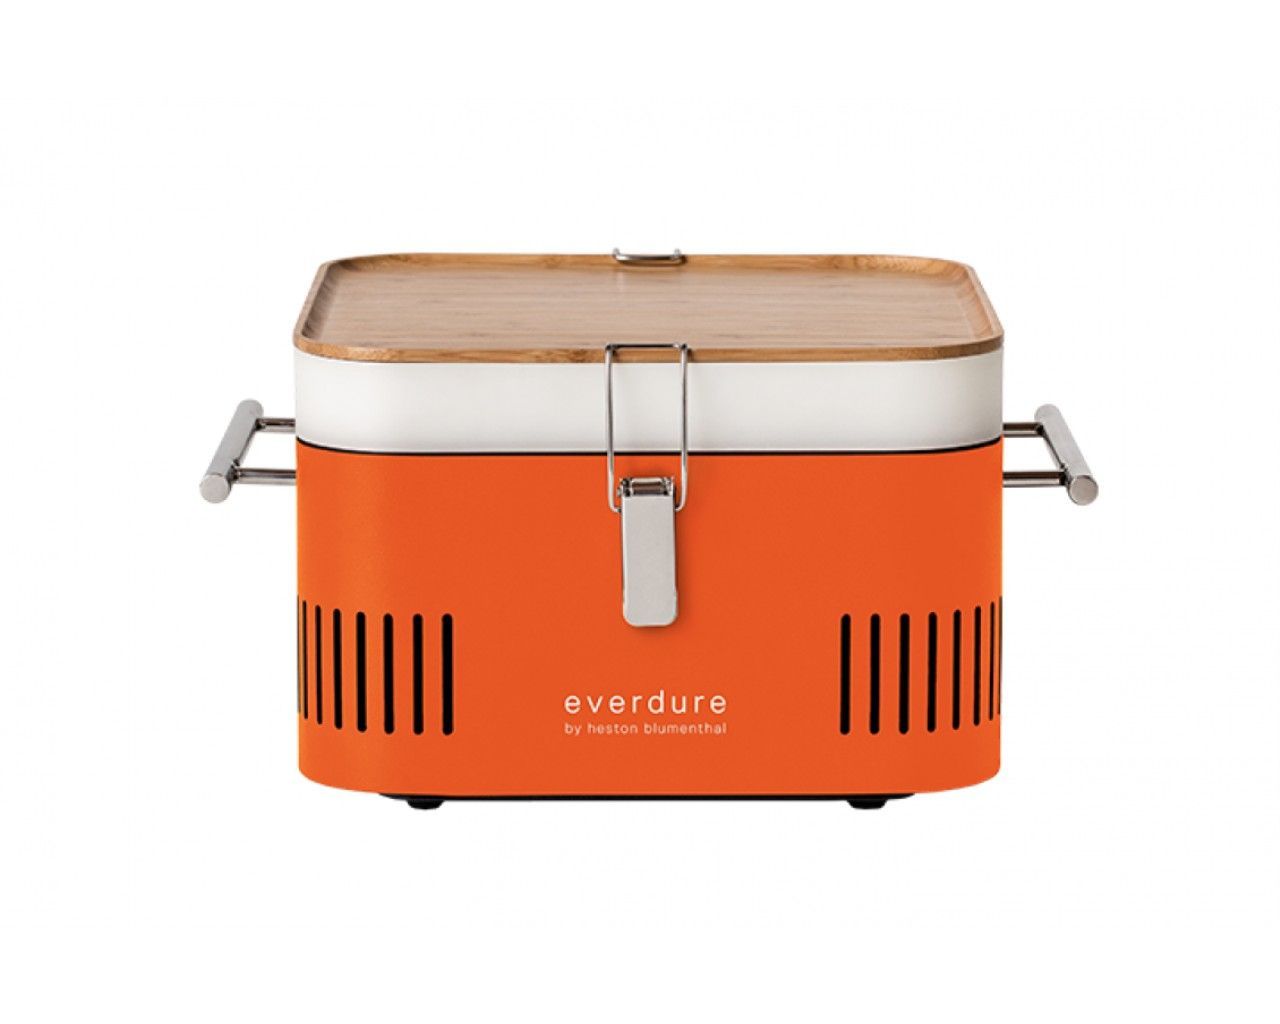 Everdure by Heston Blumenthal CUBE Charcoal Portable Barbeque, Orange, small-swatch